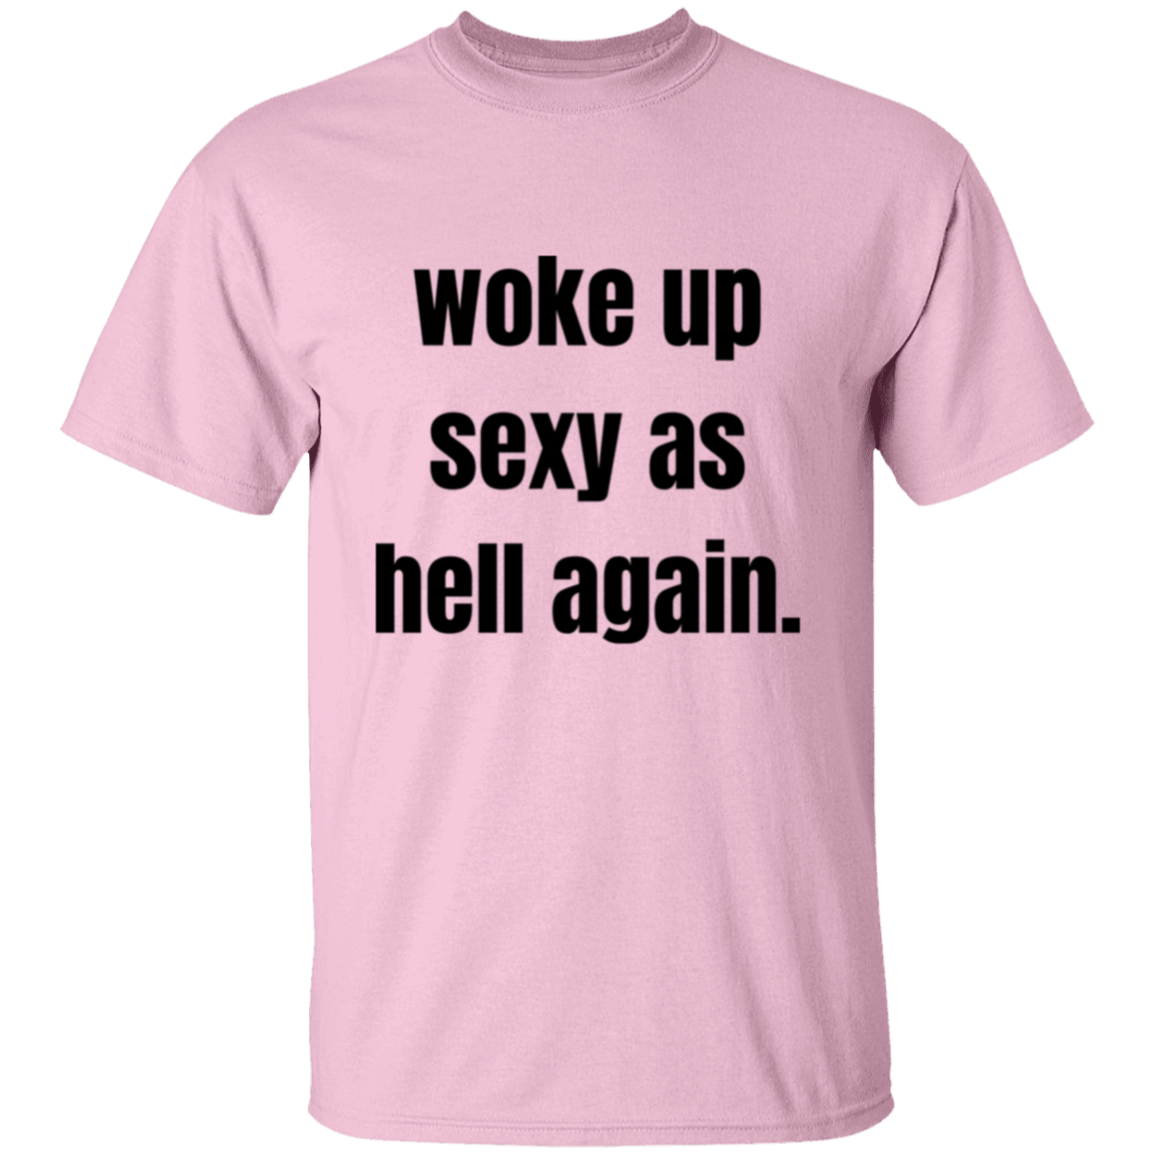 woke up sexy as hell again. T-Shirt